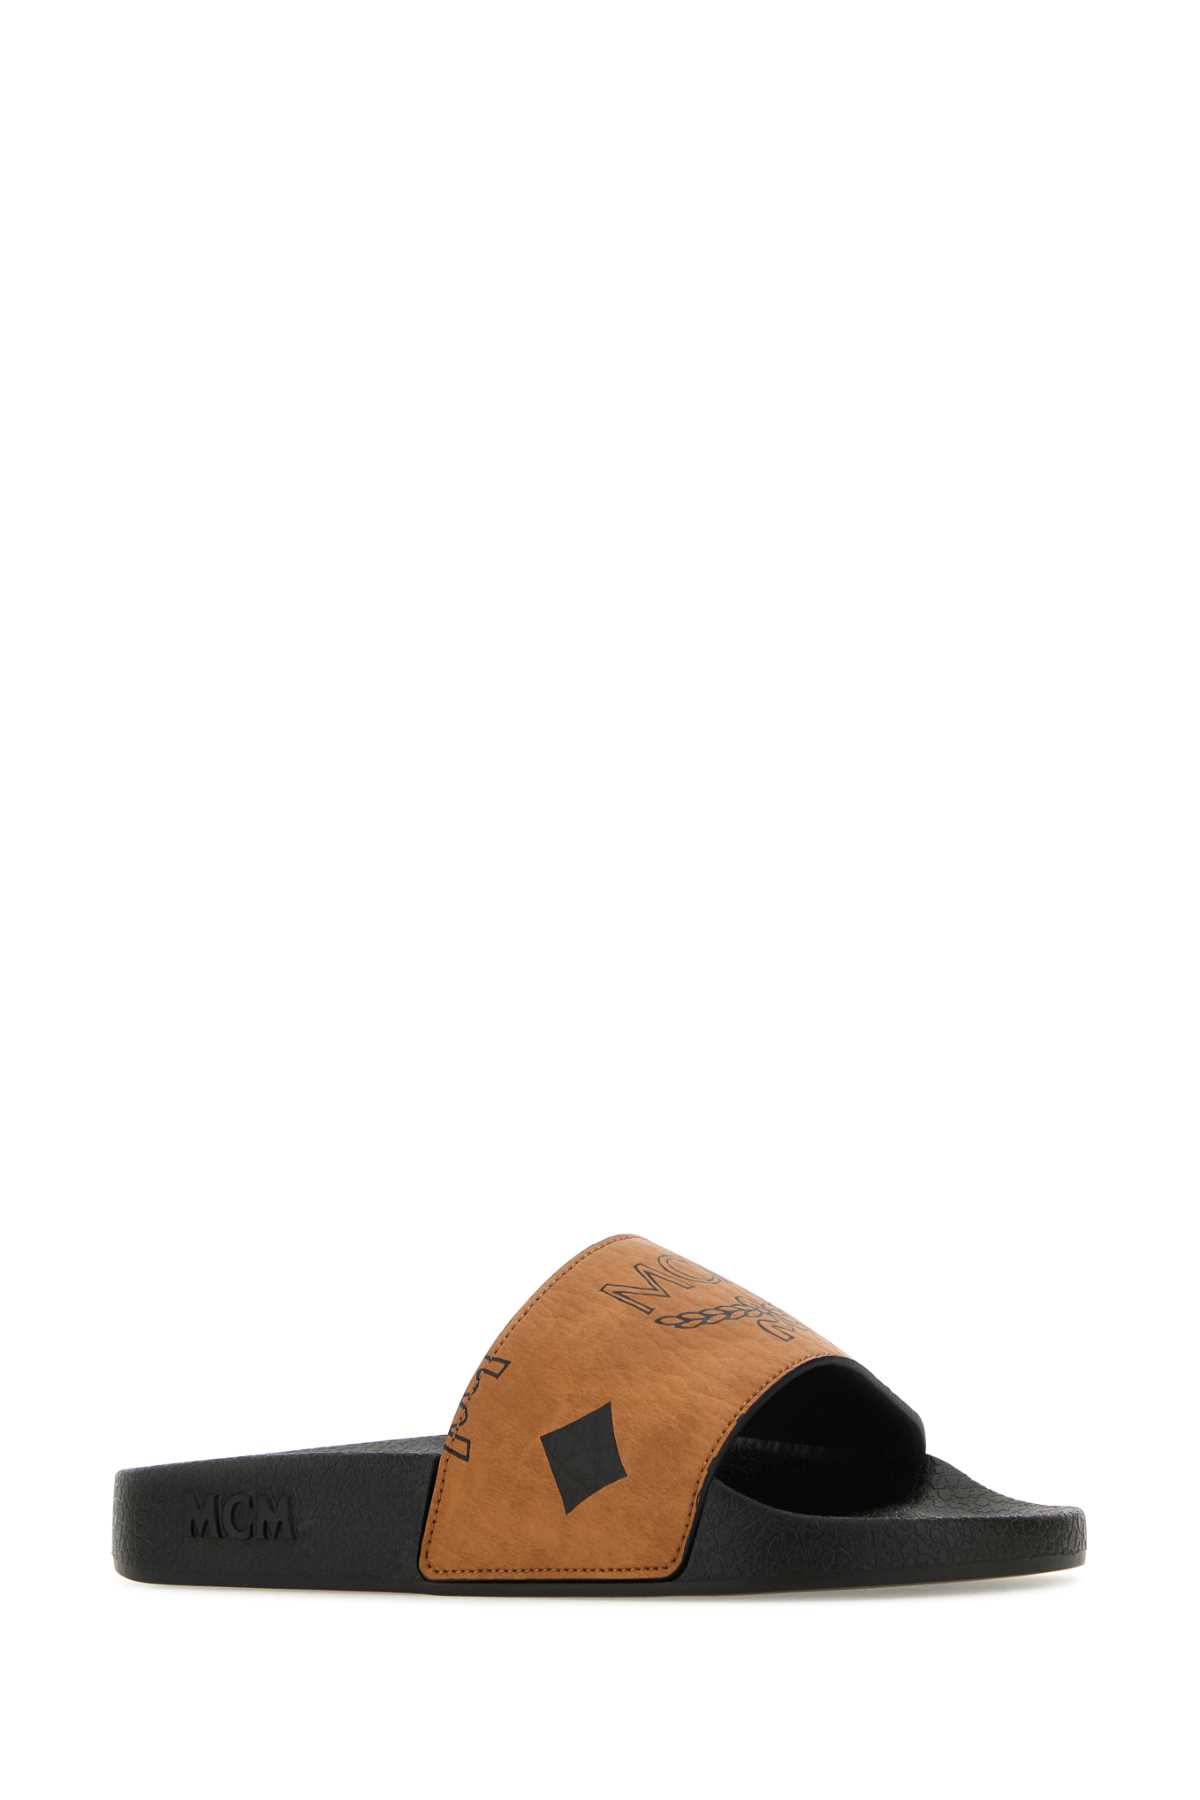 Mcm Camel Rubber Slippers In Cognac